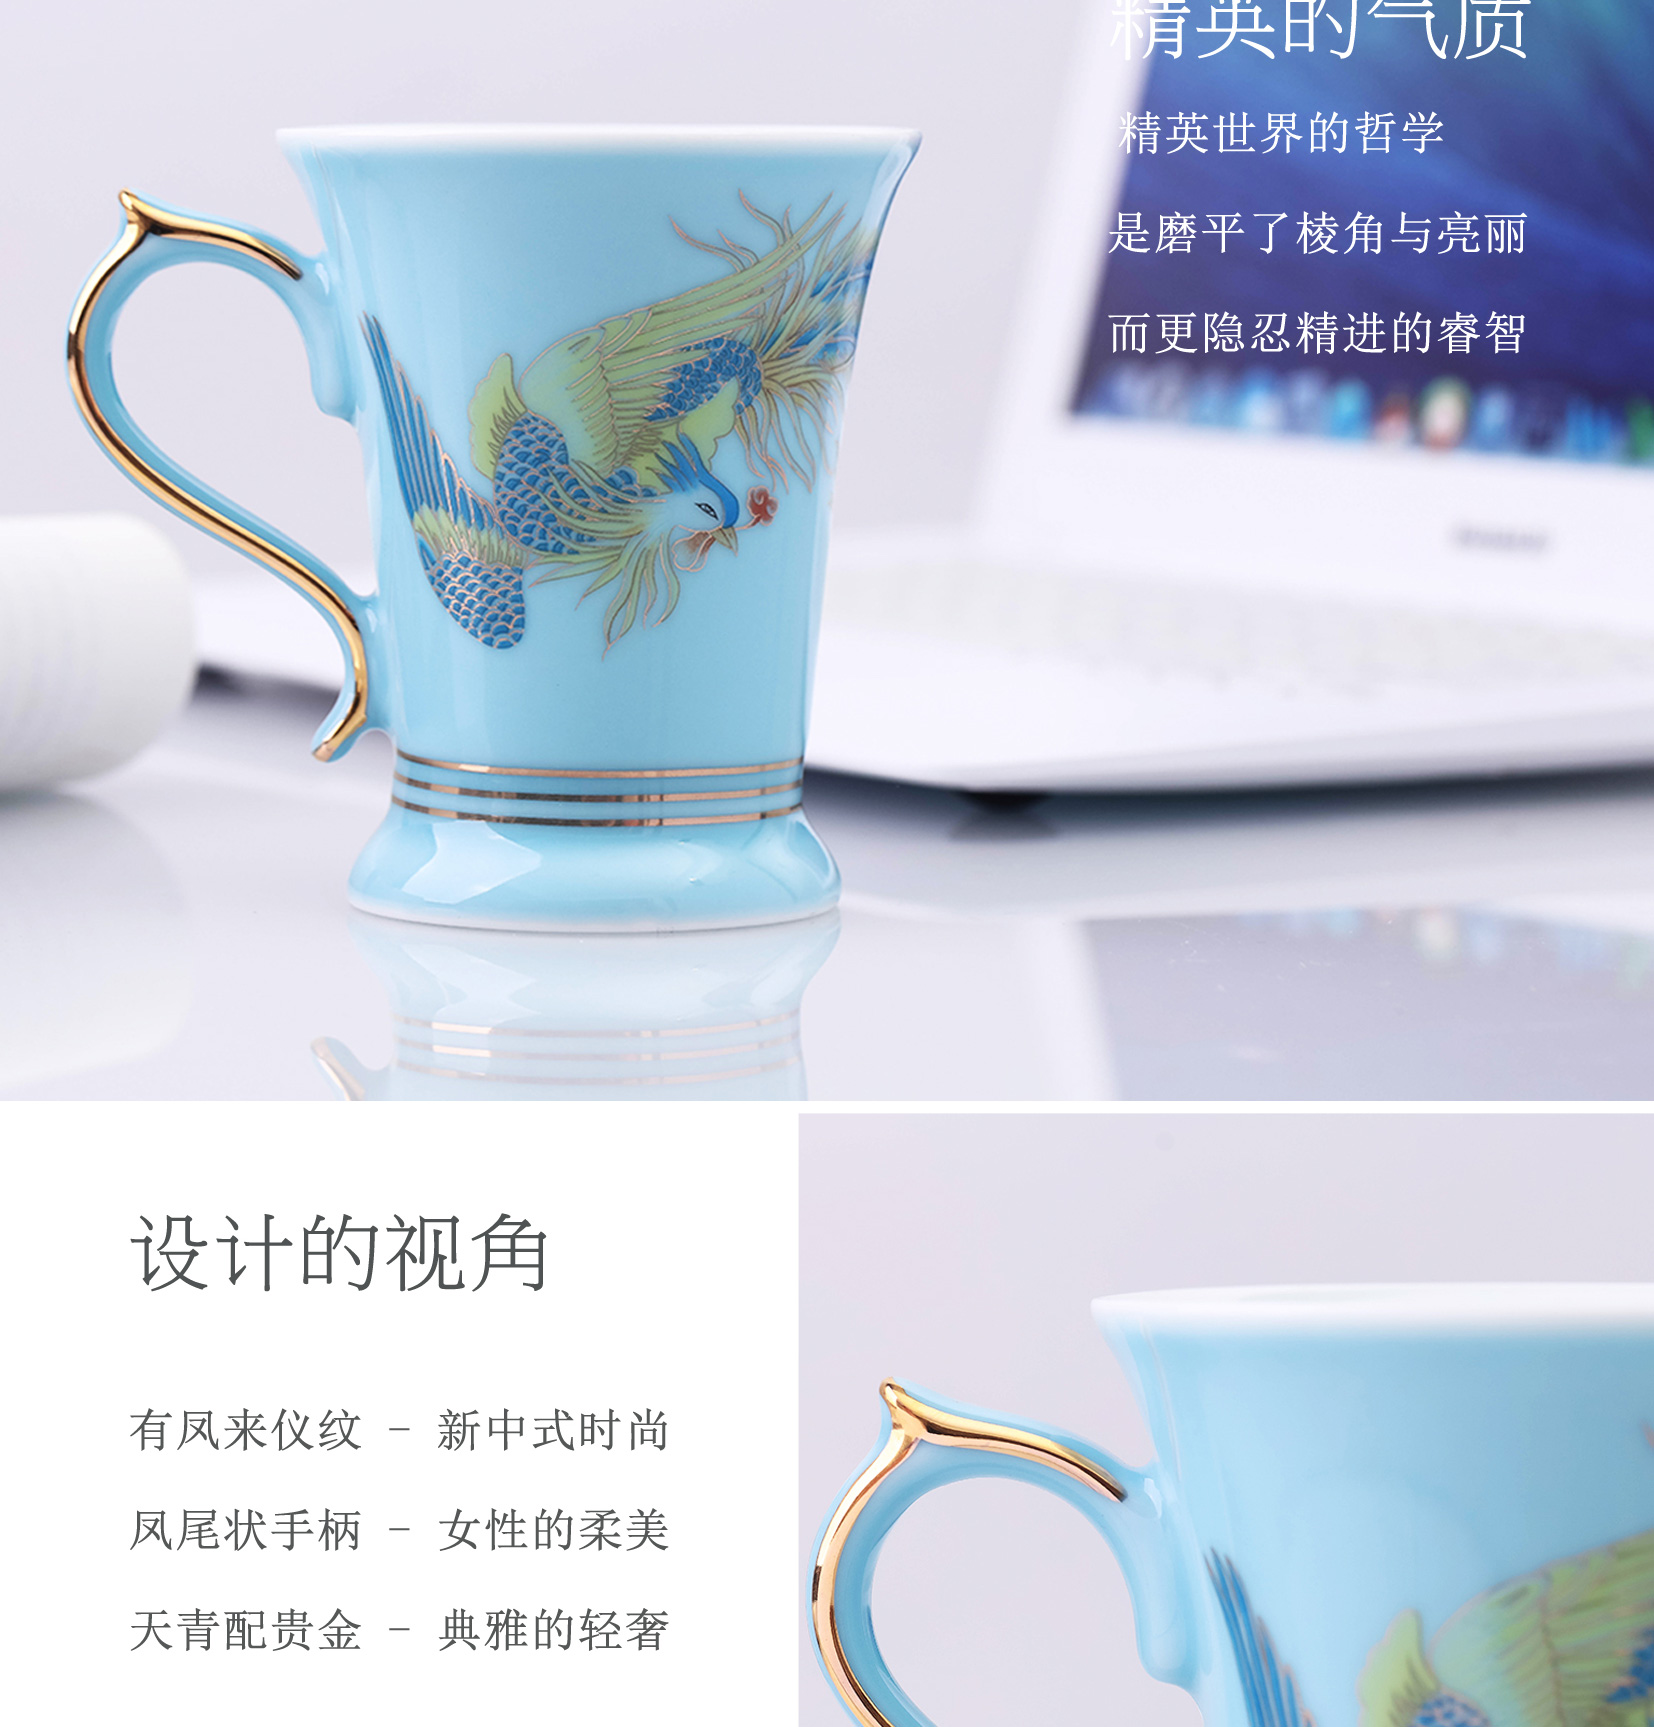 Treasure porcelain is Lin feng instrument coffee cups and saucers mugs